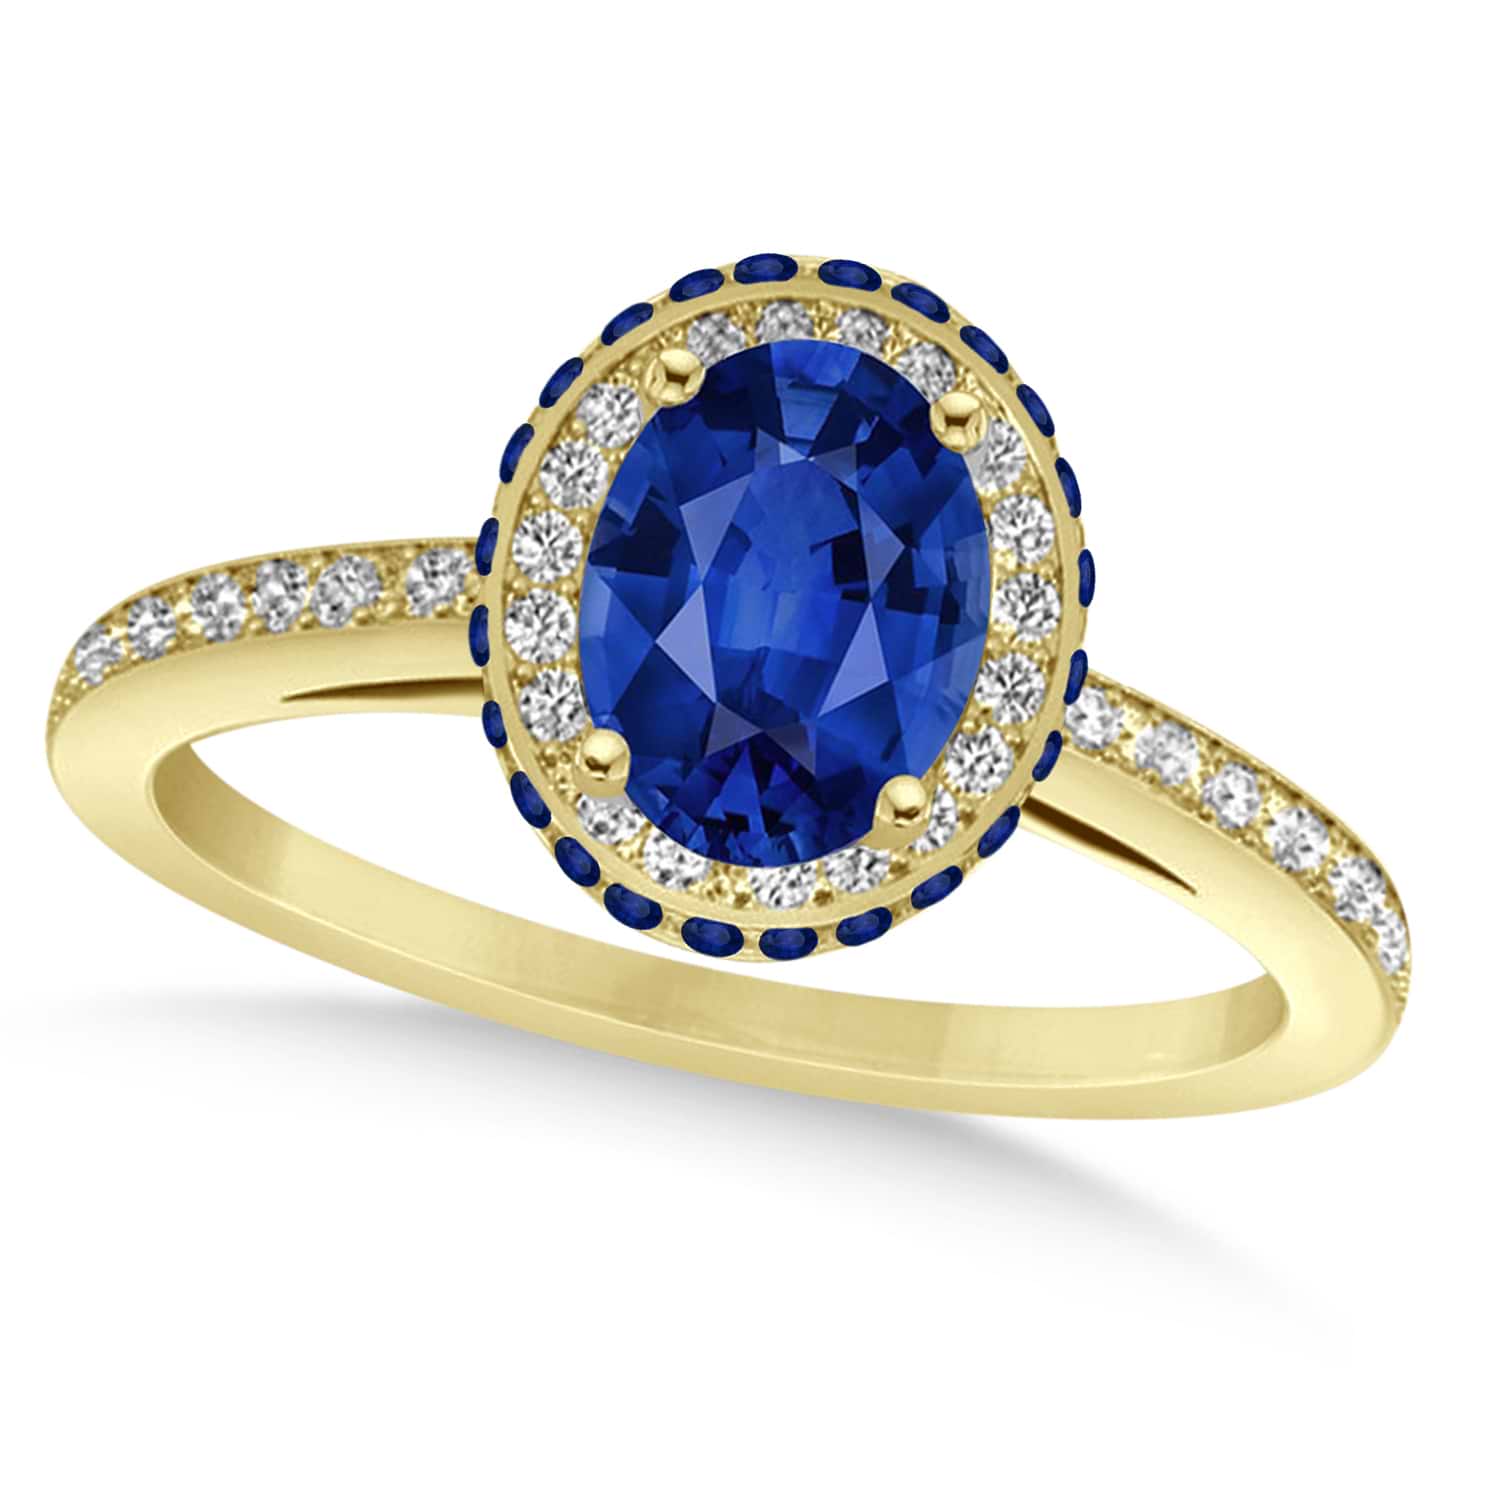 Oval Blue Sapphire Diamond Halo Engagement Ring 14k Yellow Gold 2.00ct